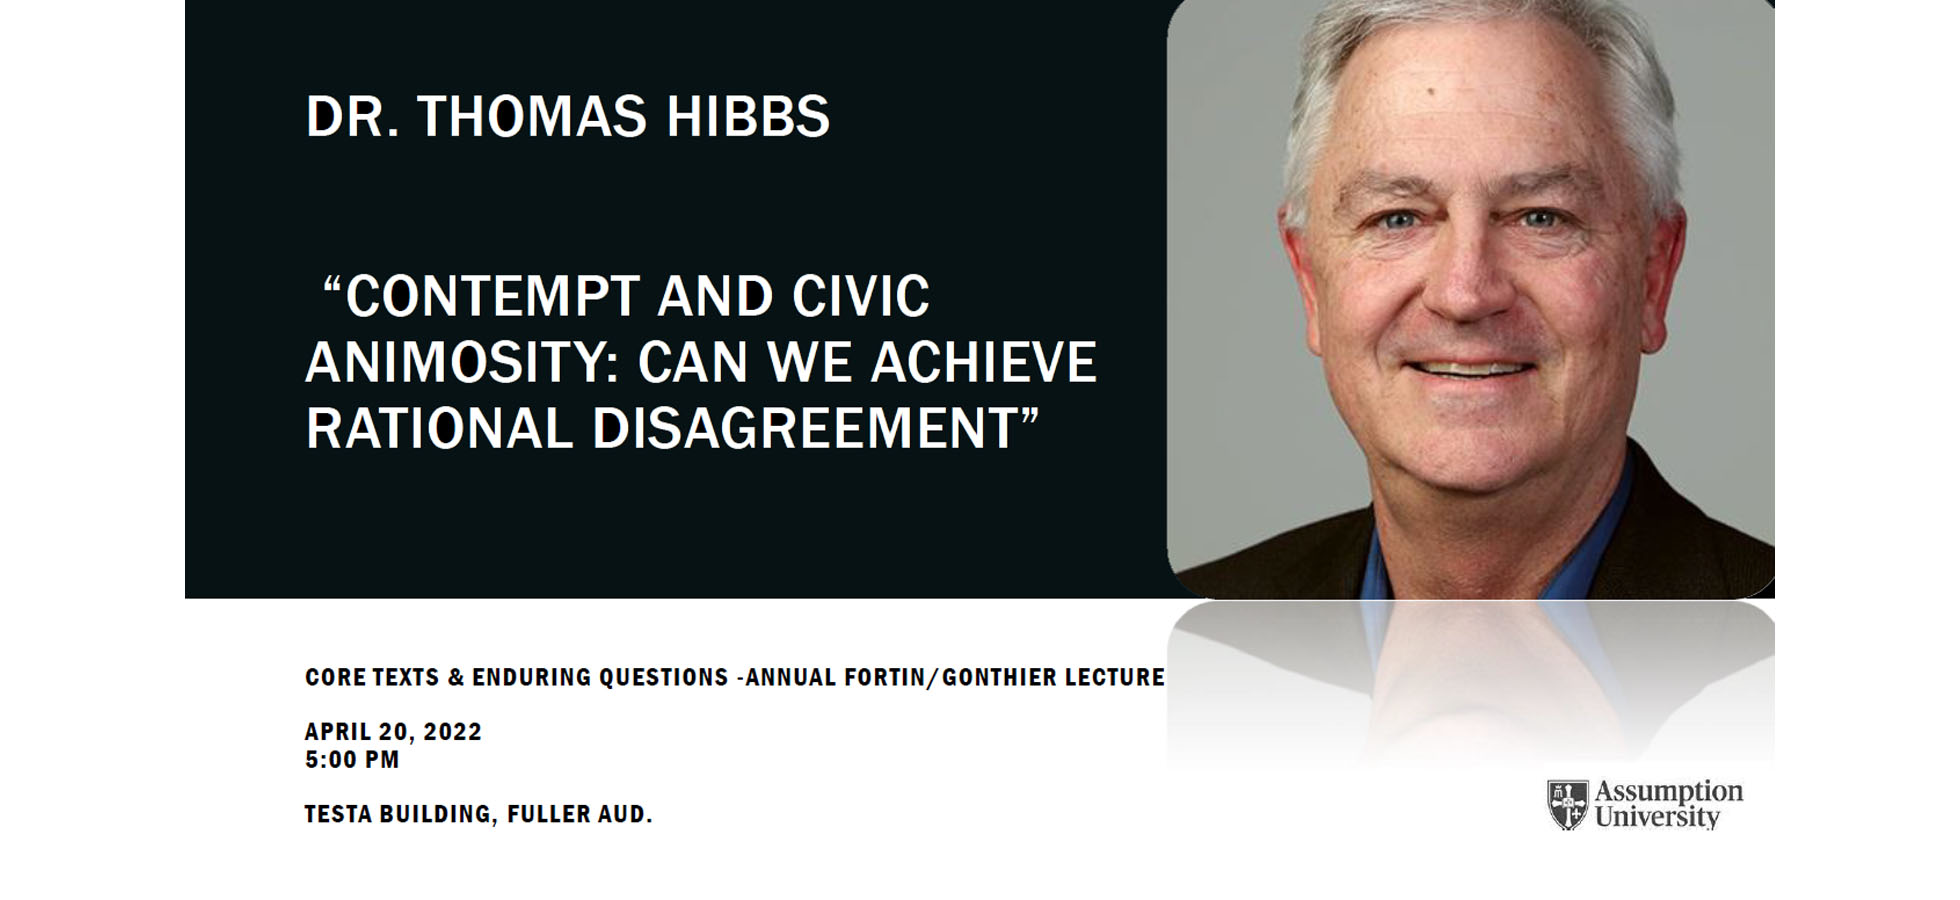 Graphic to promote a lecture at Assumption University, Contempt and Civic Animosity: Can We Achieve Rational Disagreement